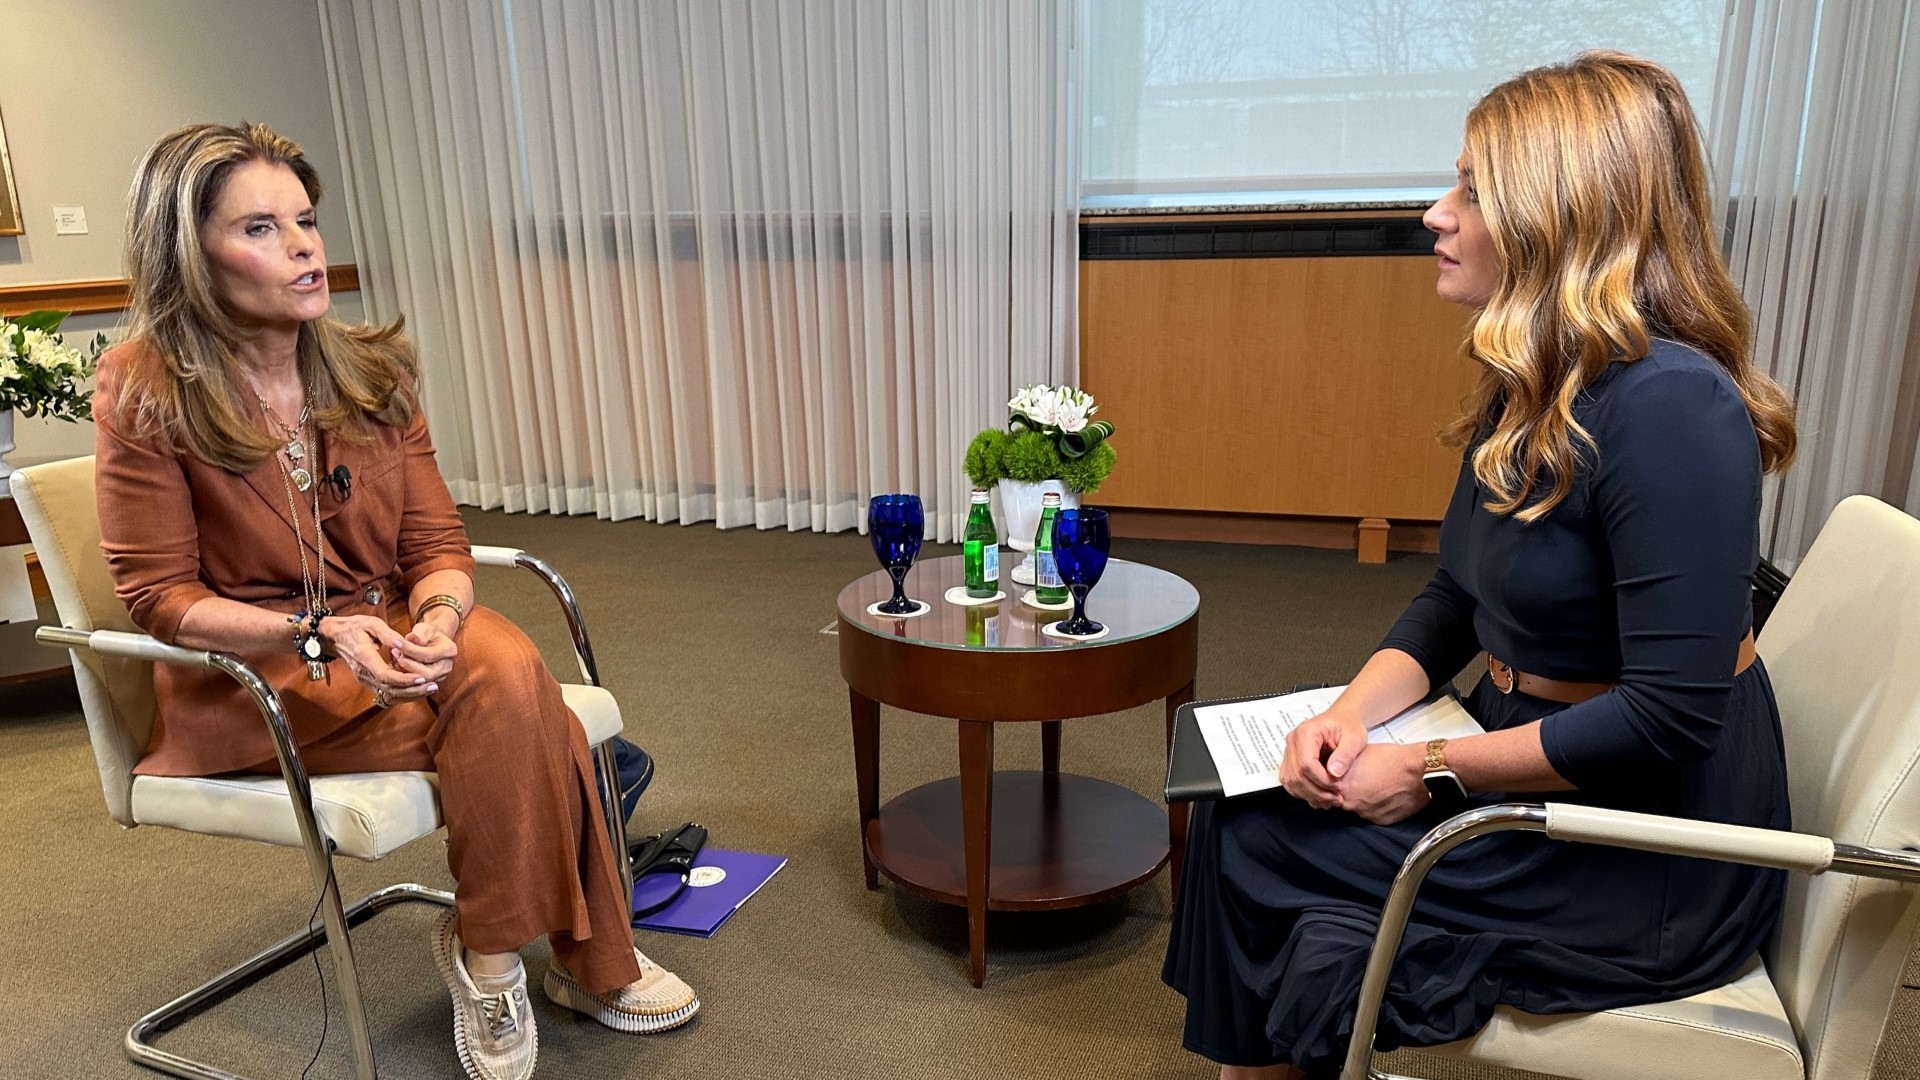 3News' Maureen Kyle sat down with Maria Shriver at Cleveland Clinic to discuss her new women's health initiative.